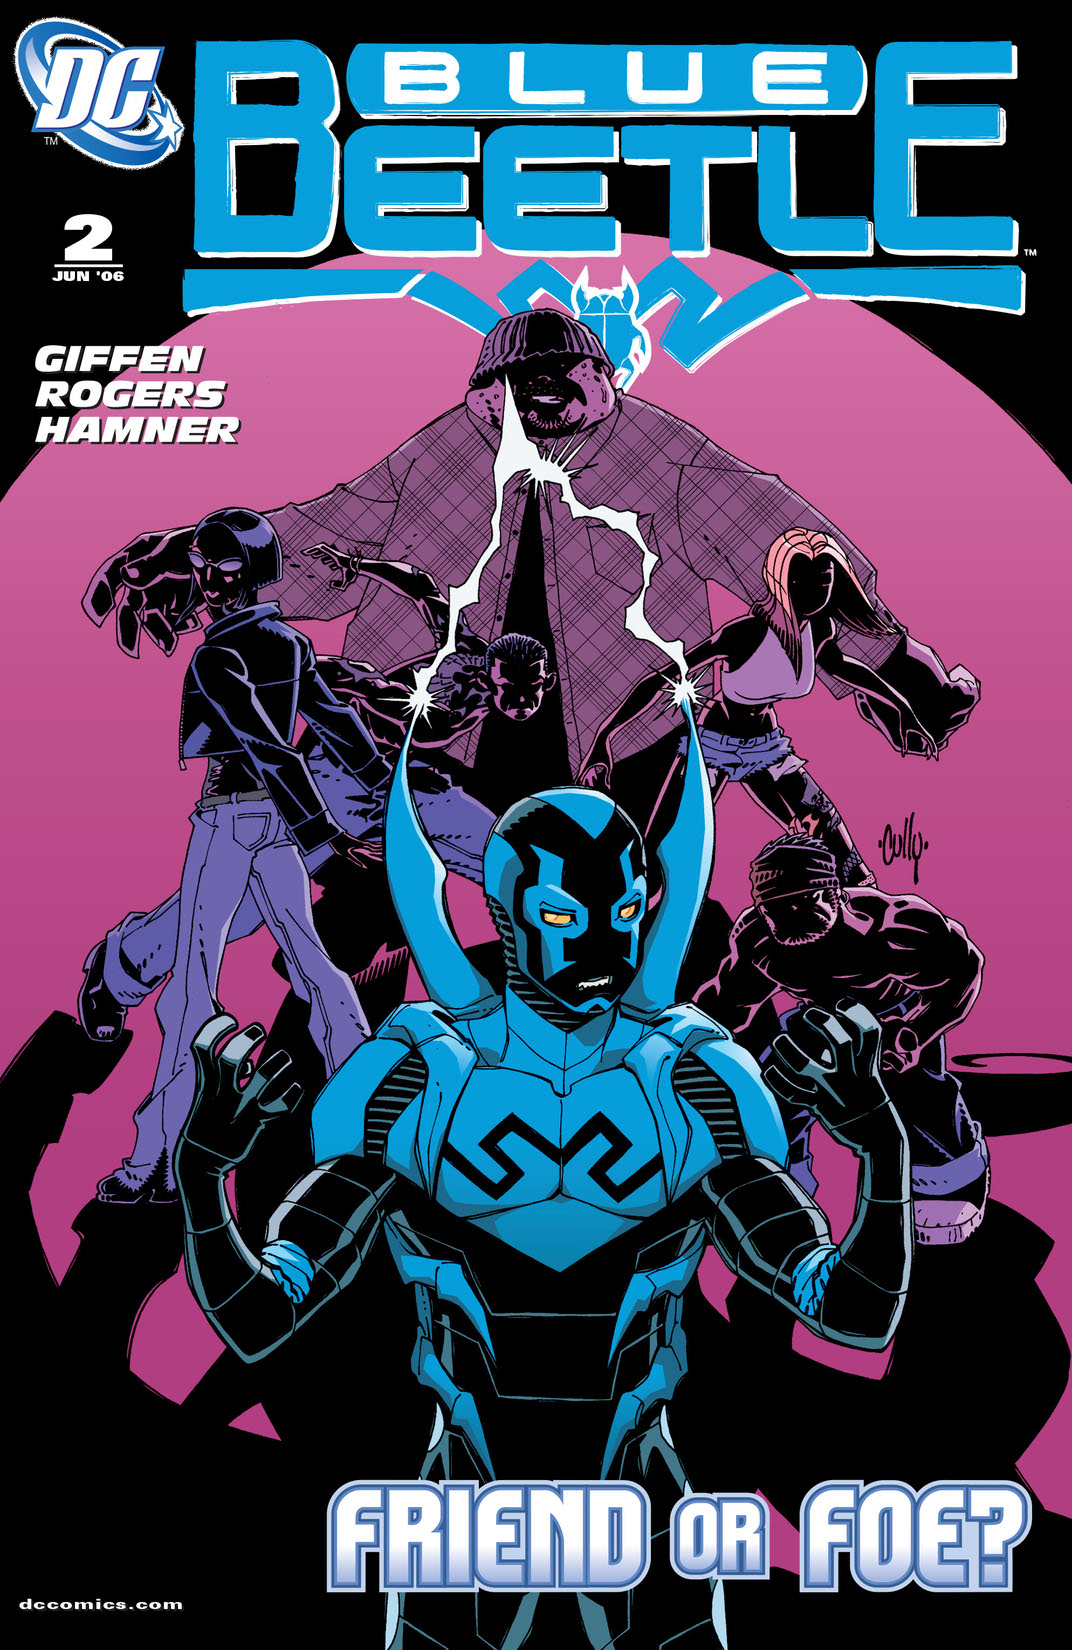 Blue Beetle (2006-) #2 preview images